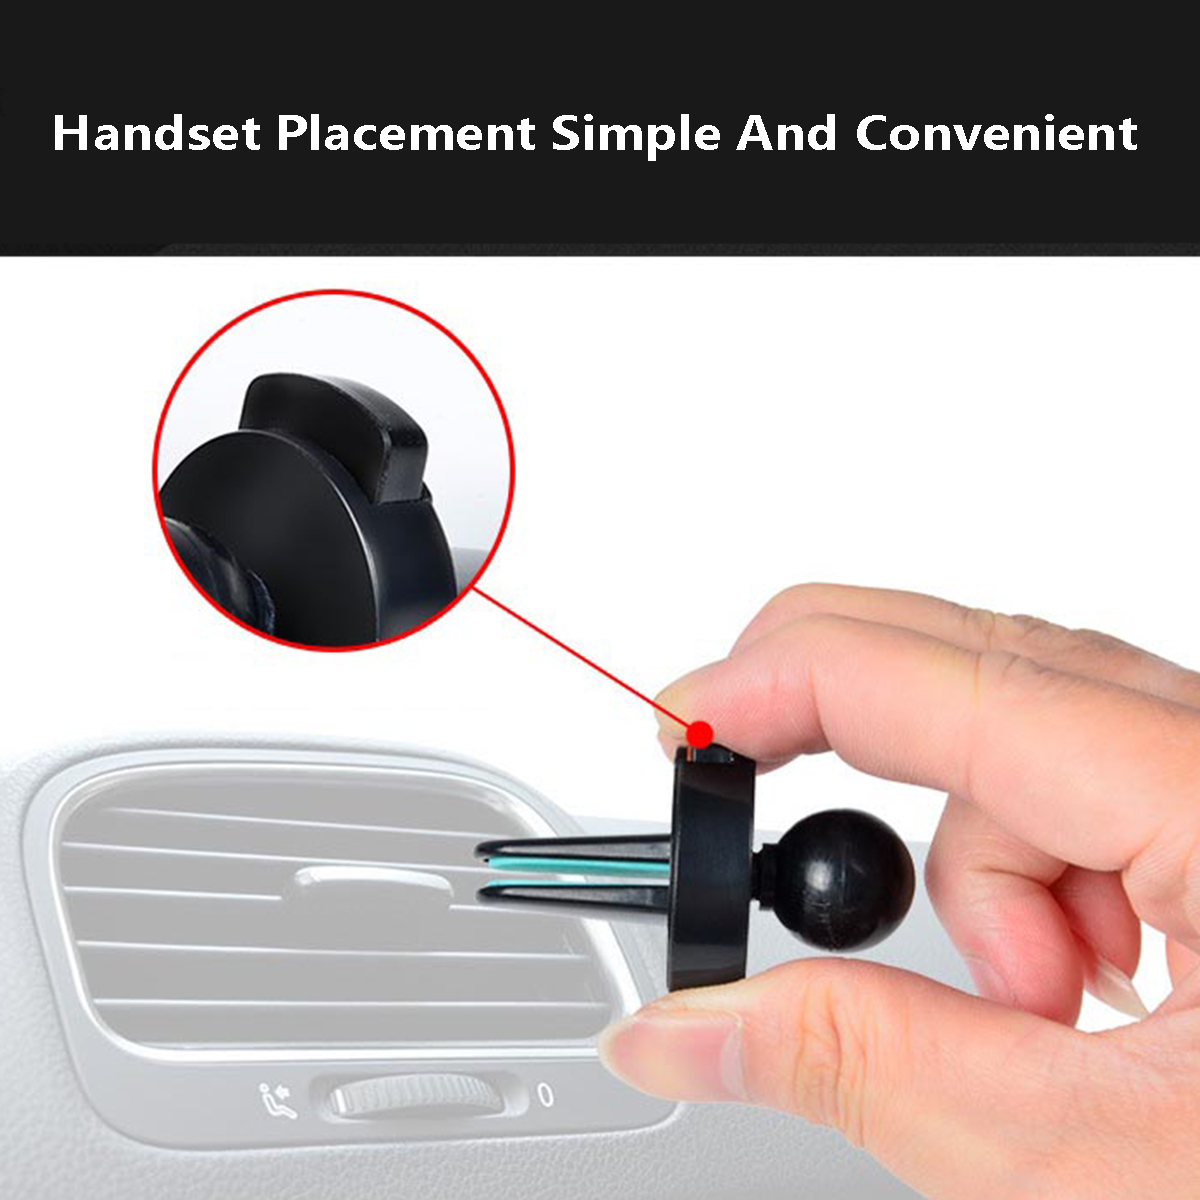 Universal-Gravity-Linkage-Auto-Lock-Car-Air-Vent-Mount-Dashboard-Holder-for-iPhone-Xiaomi-Mobile-Pho-1419383-5